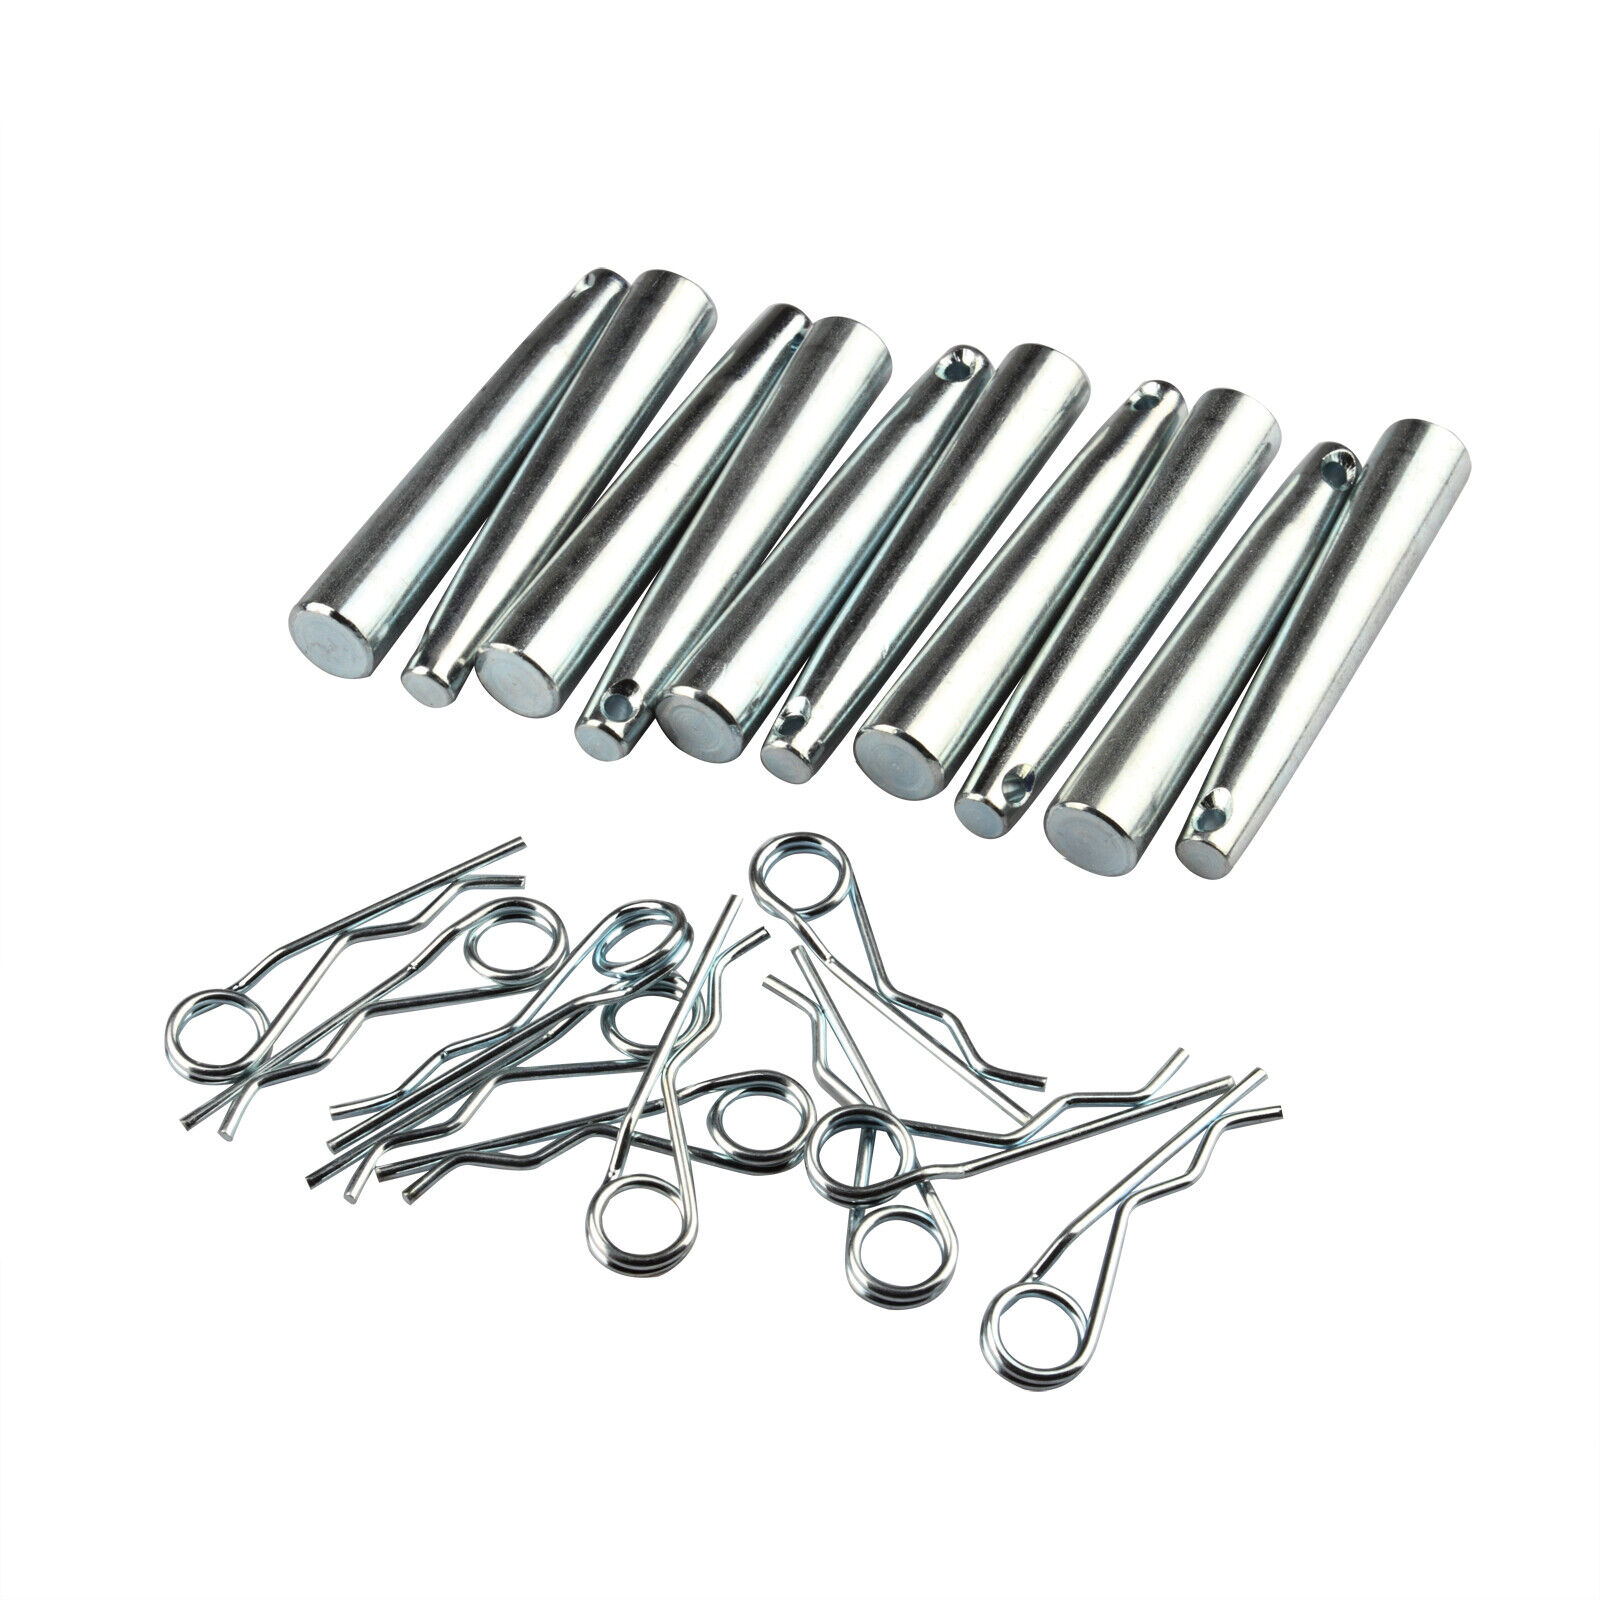 30 Sets Aluminum Conical Coupler Pins with R-Clip Stage Lights Truss Unbranded Does not apply